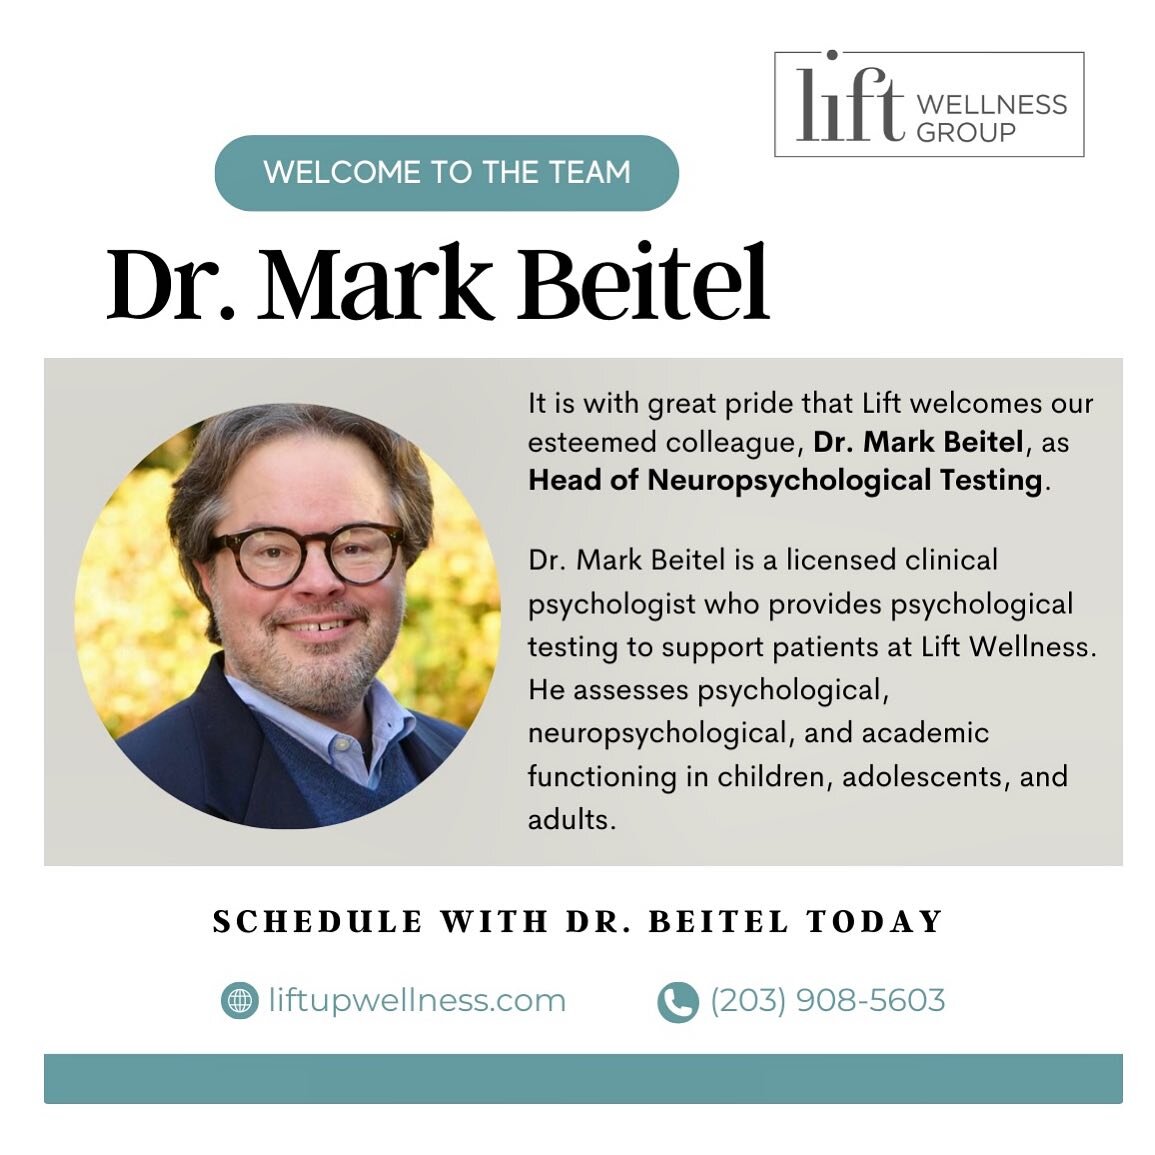 We are overjoyed to share the appointment of our longtime colleague and friend, Dr Mark Beitel, as Head of Neuropsychological Testing at Lift Wellness. Dr. Mark Beitel, licensed clinical psychologist, provides psychological testing to support patient